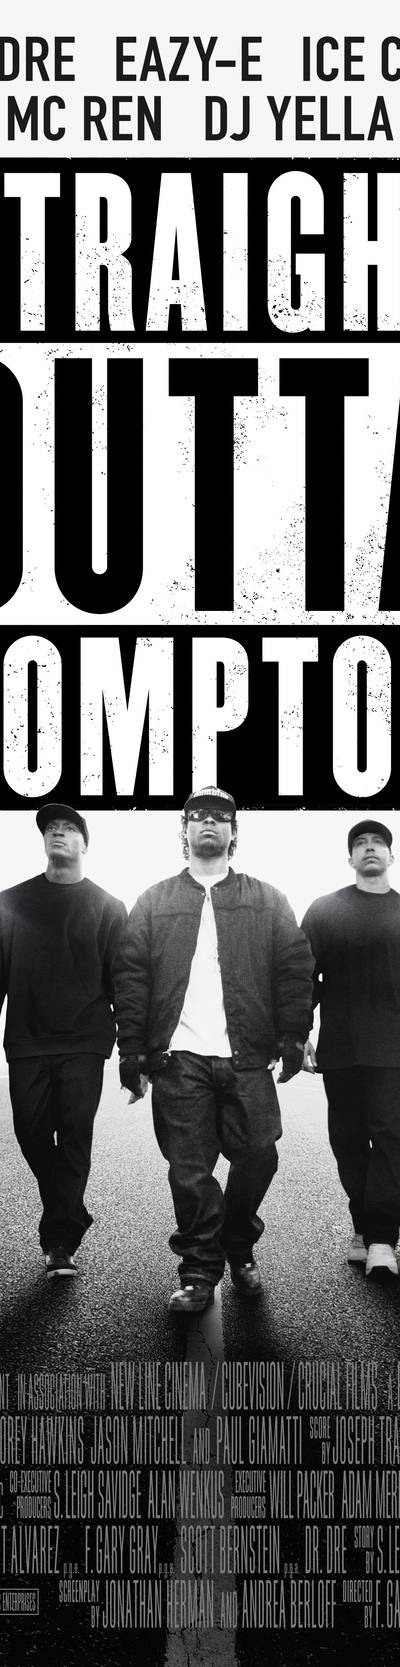 Straight Outta Compton - Even ahead of its massive box office success, Straight Outta Compton was dominating social media with the viral &quot;Straight Outta...&quot; memes circulated all over Twitter, Facebook, Instagram and Tumblr. Some used it as an opportunity to show some hometown pride while others saw it as a way to crack jokes — &quot;Straight Outta Groceries&quot; lol.(Photo: Universal Pictures)&nbsp;